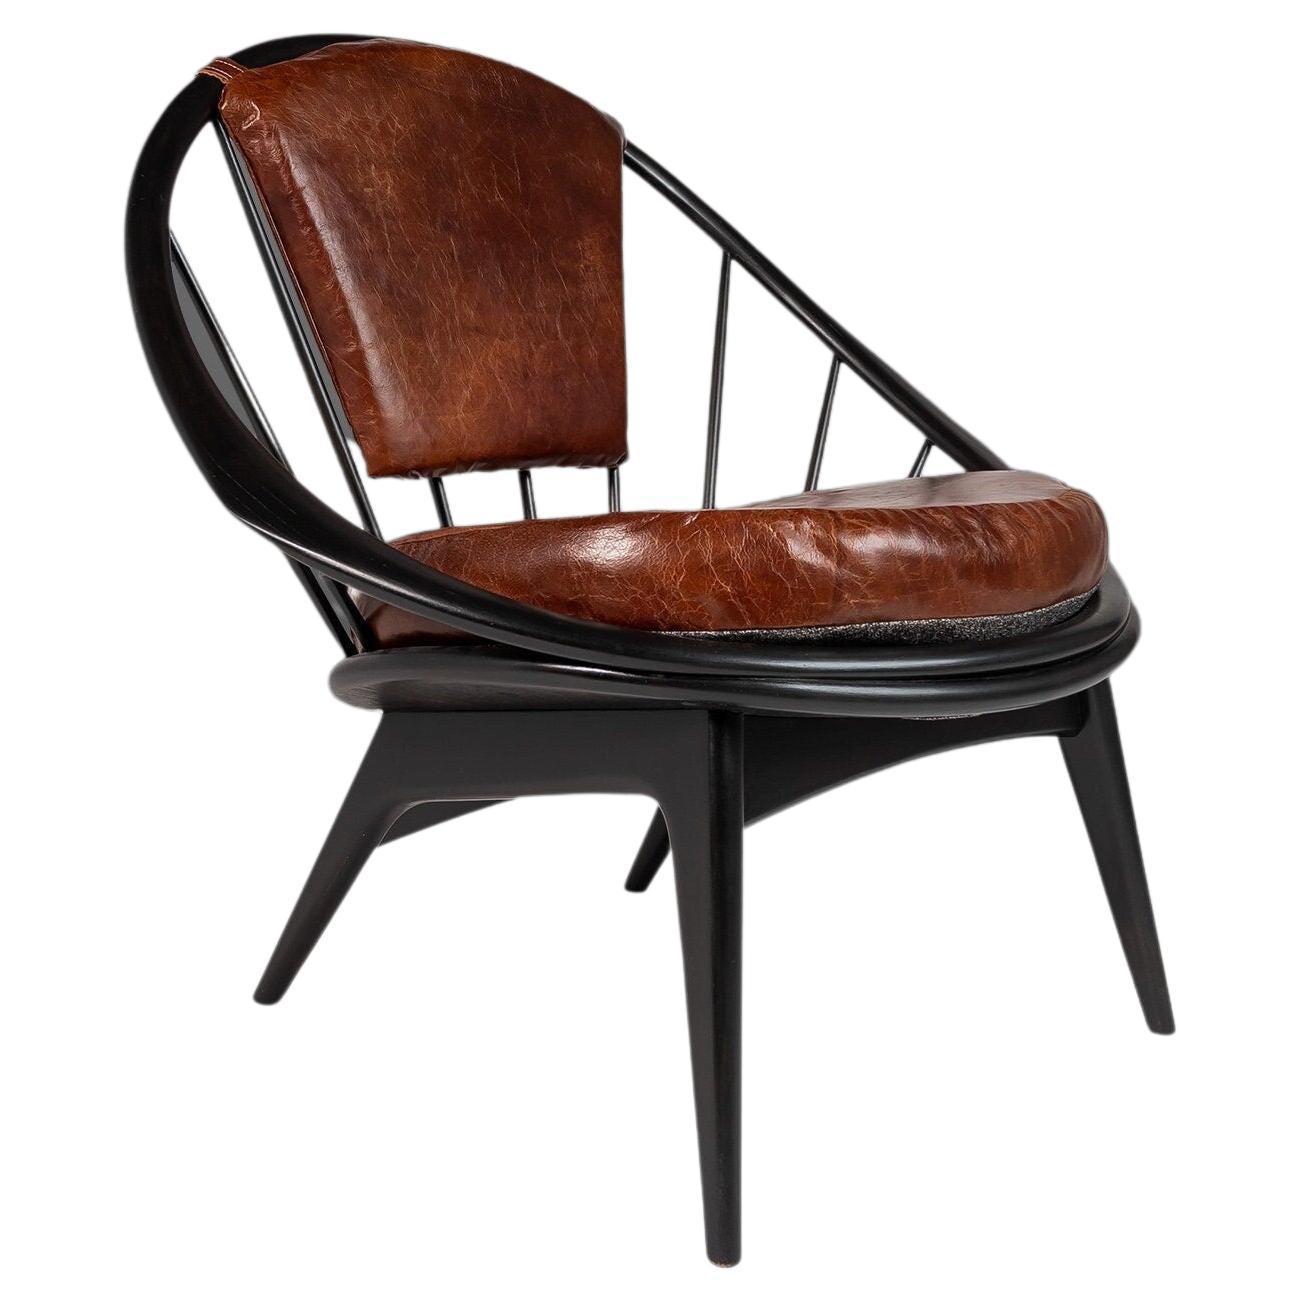 Ib Kofod-Larsen for Selig Ebonized Hoop Chair, Peacock Chair w/ Patinaed Leather For Sale